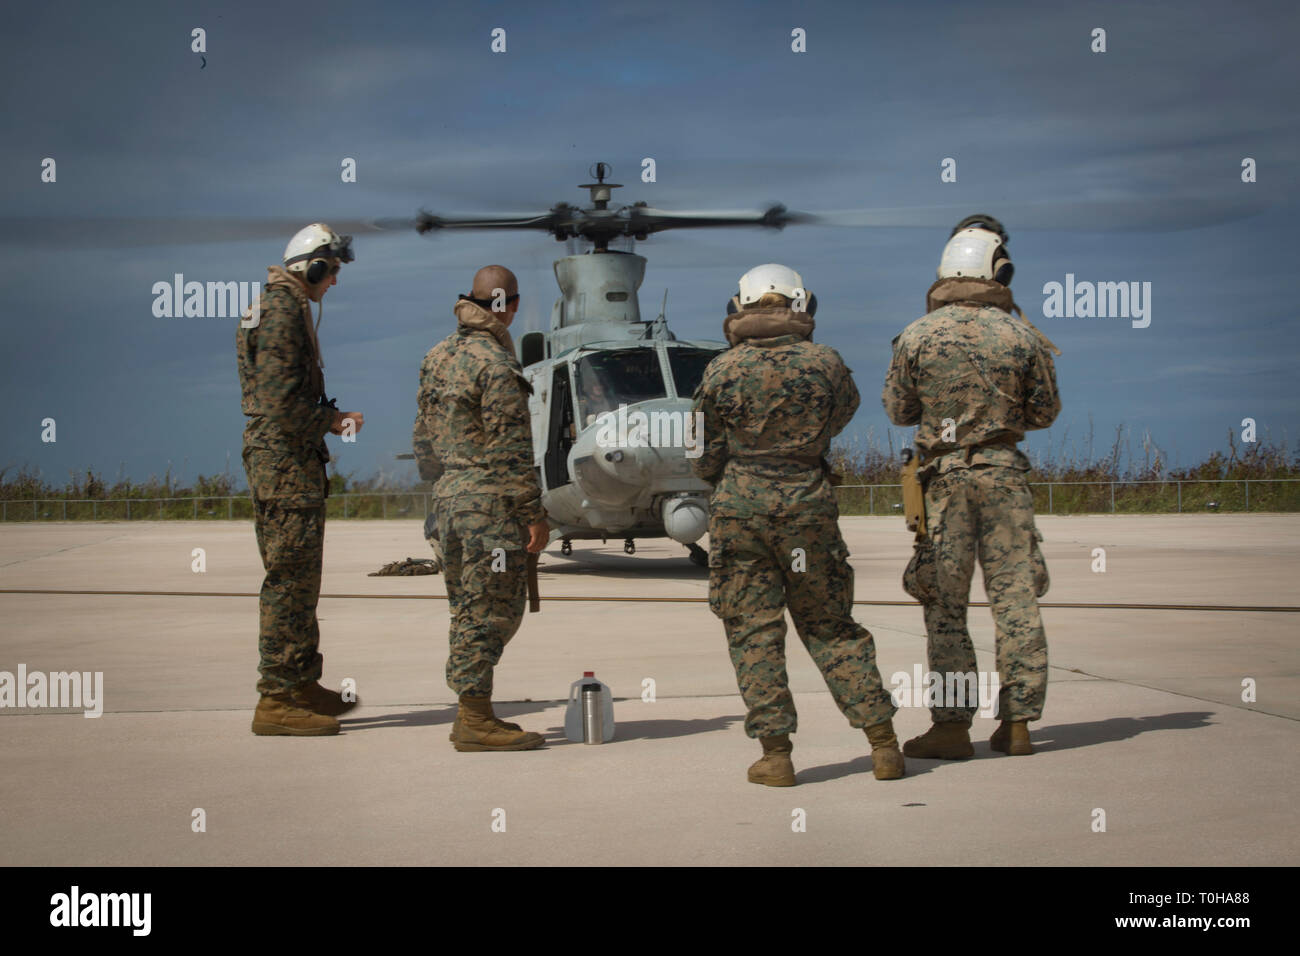 Marines with Combat Logistics Battalion 31 and Alpha Company, Battalion Landing Team, 1st Battalion, 4th Marines, prepare to board a UH-1Y Huey helicopter at Anderson Air Force Base, Guam, before a visit to Tinian, Commonwealth of the Northern Mariana Islands, March 11, 2019. Marines and Sailors with CLB-31 led a multi-service task force, partnering with the Federal Emergency Management Agency, to help the U.S. citizens of Tinian begin recovery efforts in the wake of Super Typhoon Yutu last year. The Marines and Sailors, currently participating in two weeks of unit-level training on nearby Gua Stock Photo